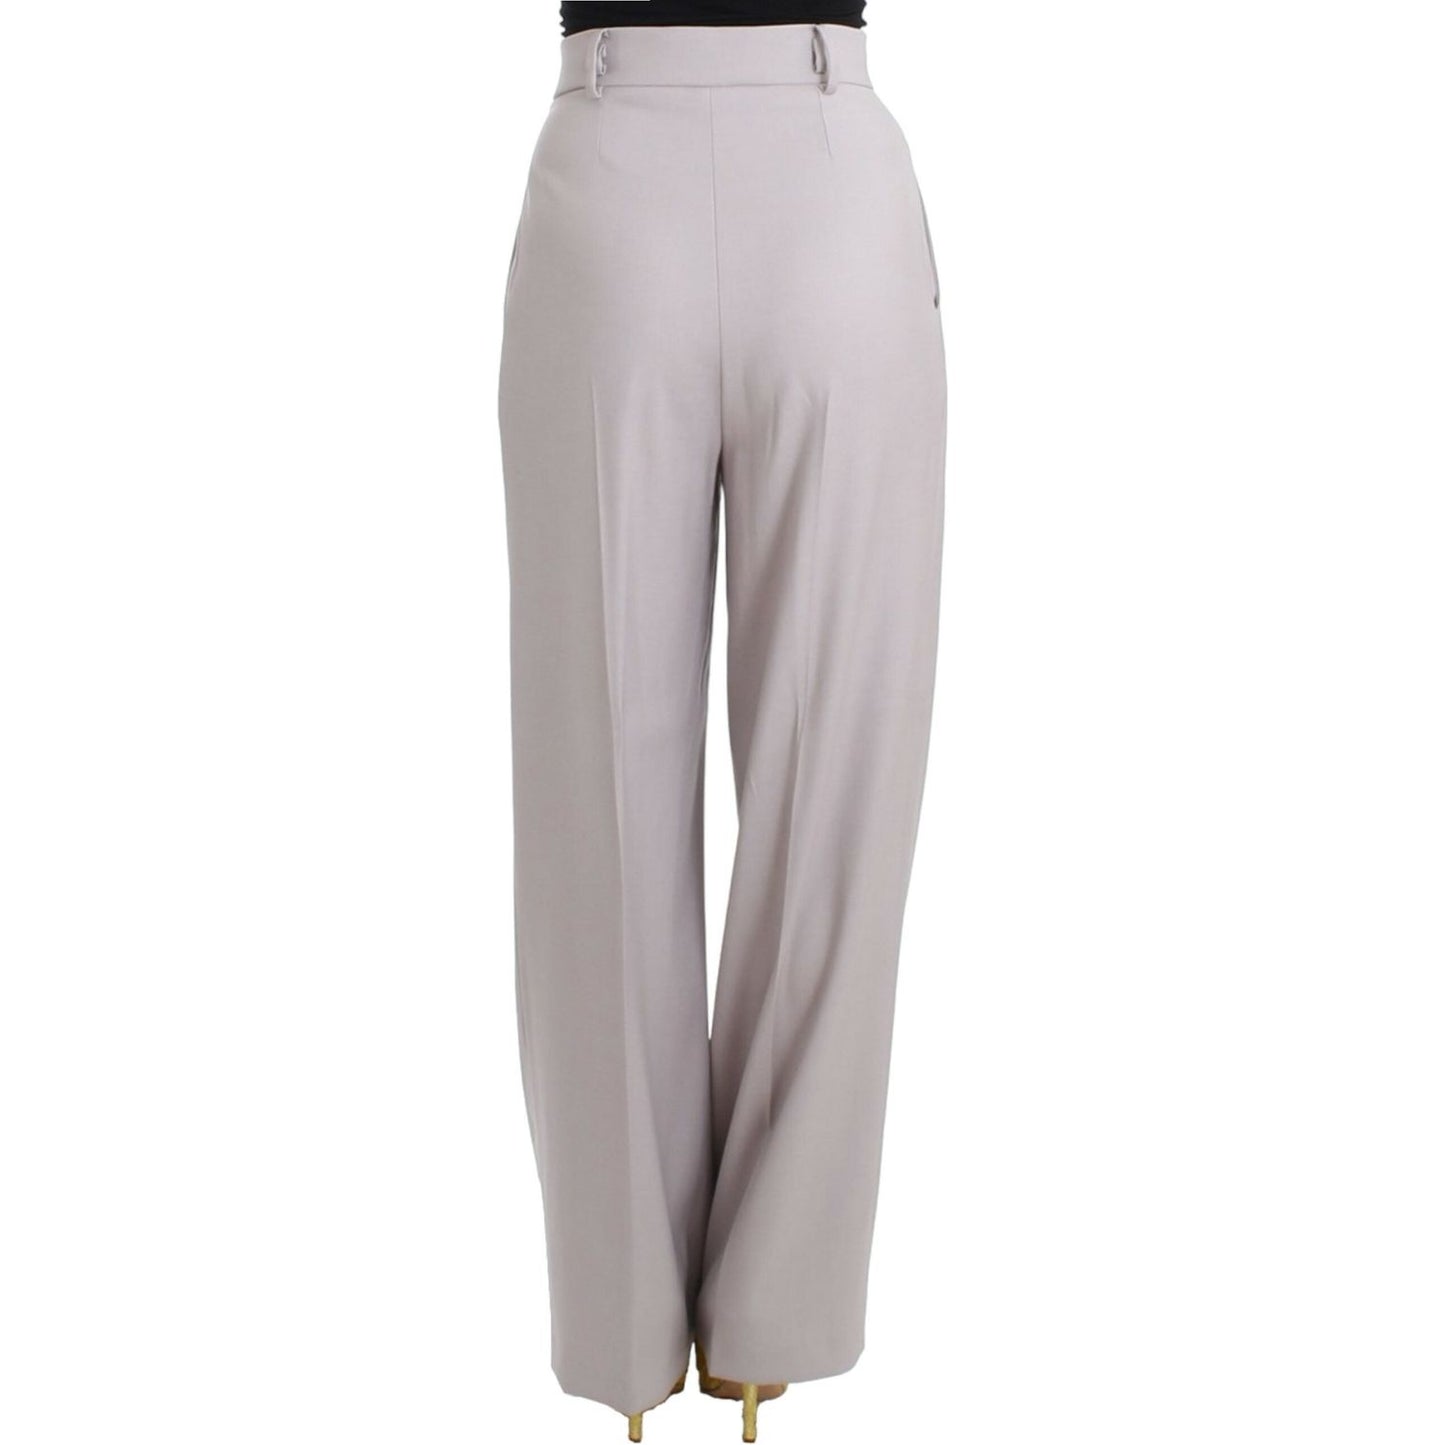 Sophisticated High Waisted Gray Pants Cavalli